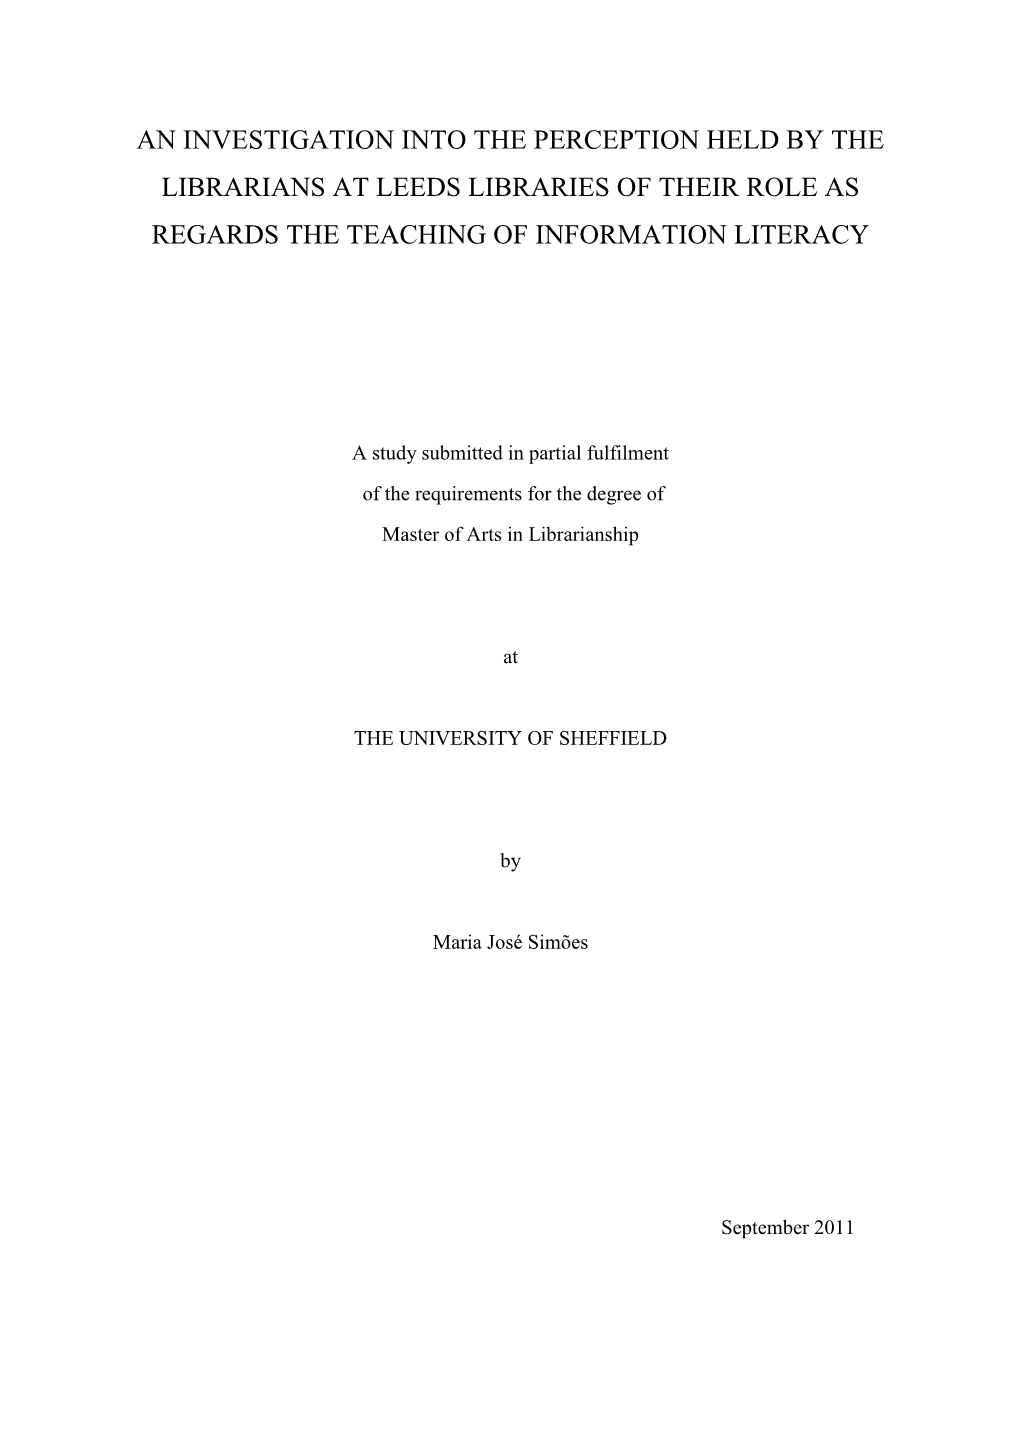 An Investigation Into the Perception Held by the Librarians at Leeds Libraries of Their Role As Regards the Teaching of Information Literacy